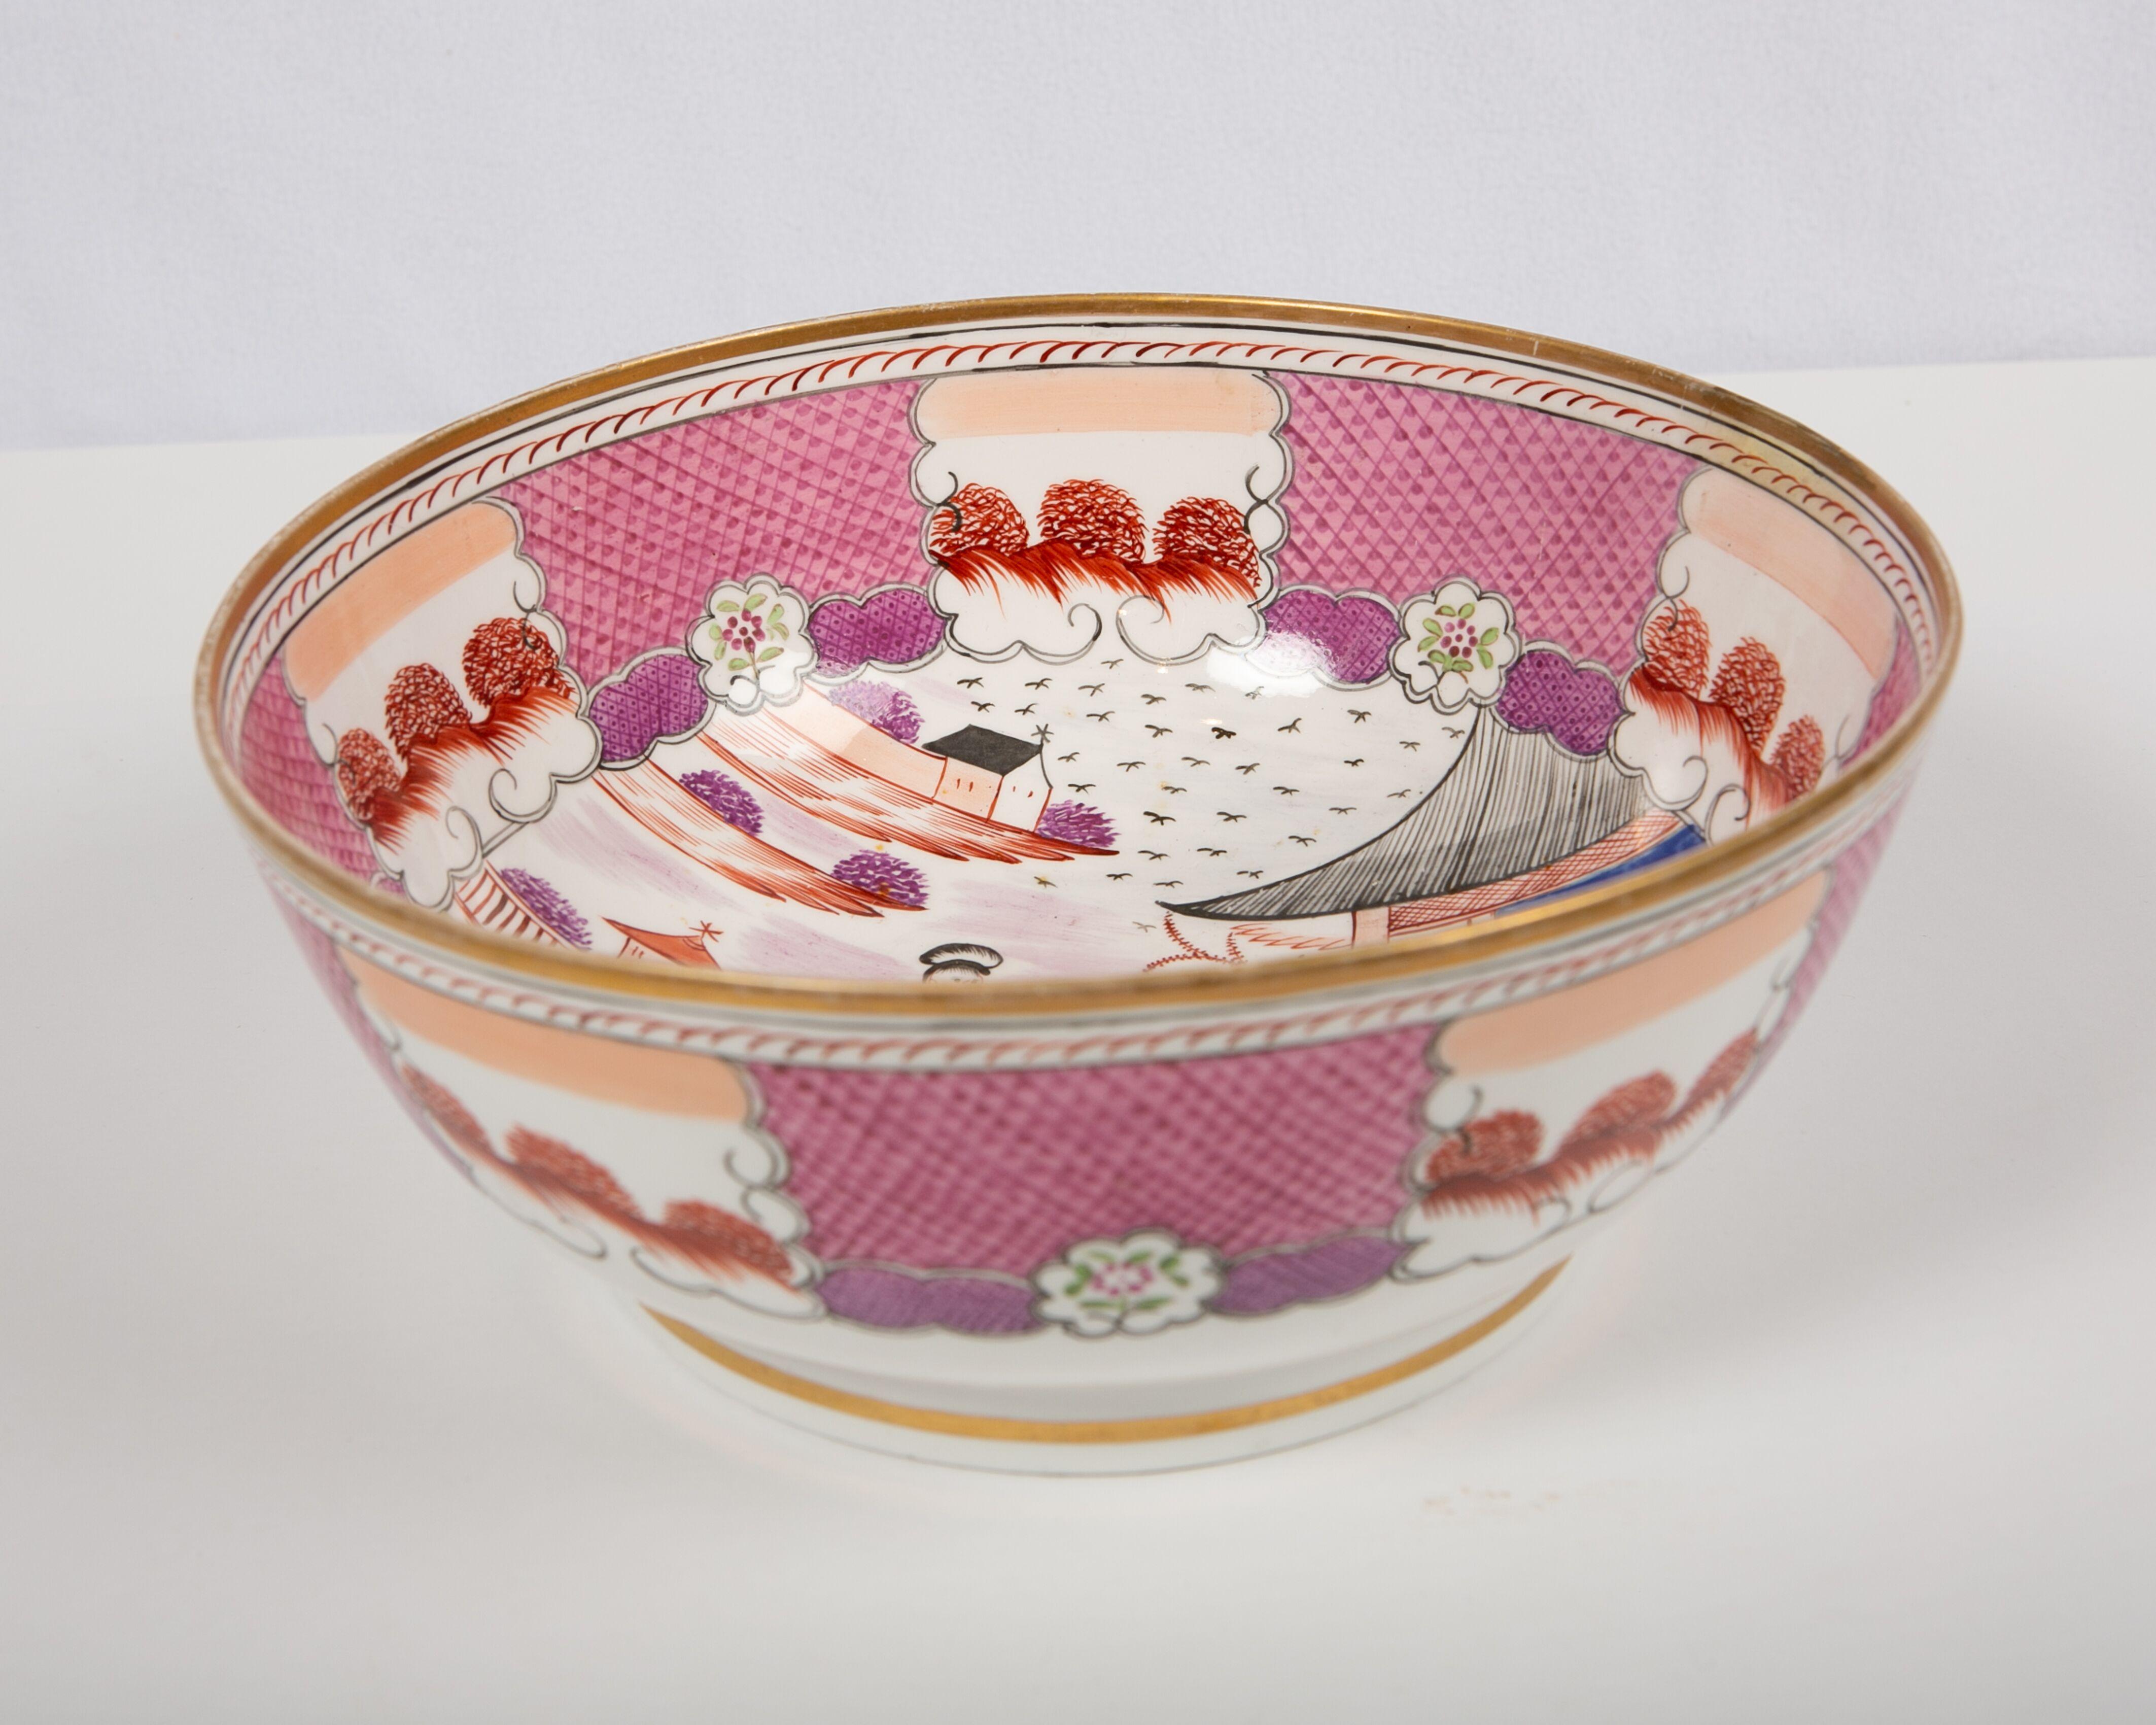 Large Minton Bowl Hand-Painted with Chinoiserie Scene, England, Circa 1820 1